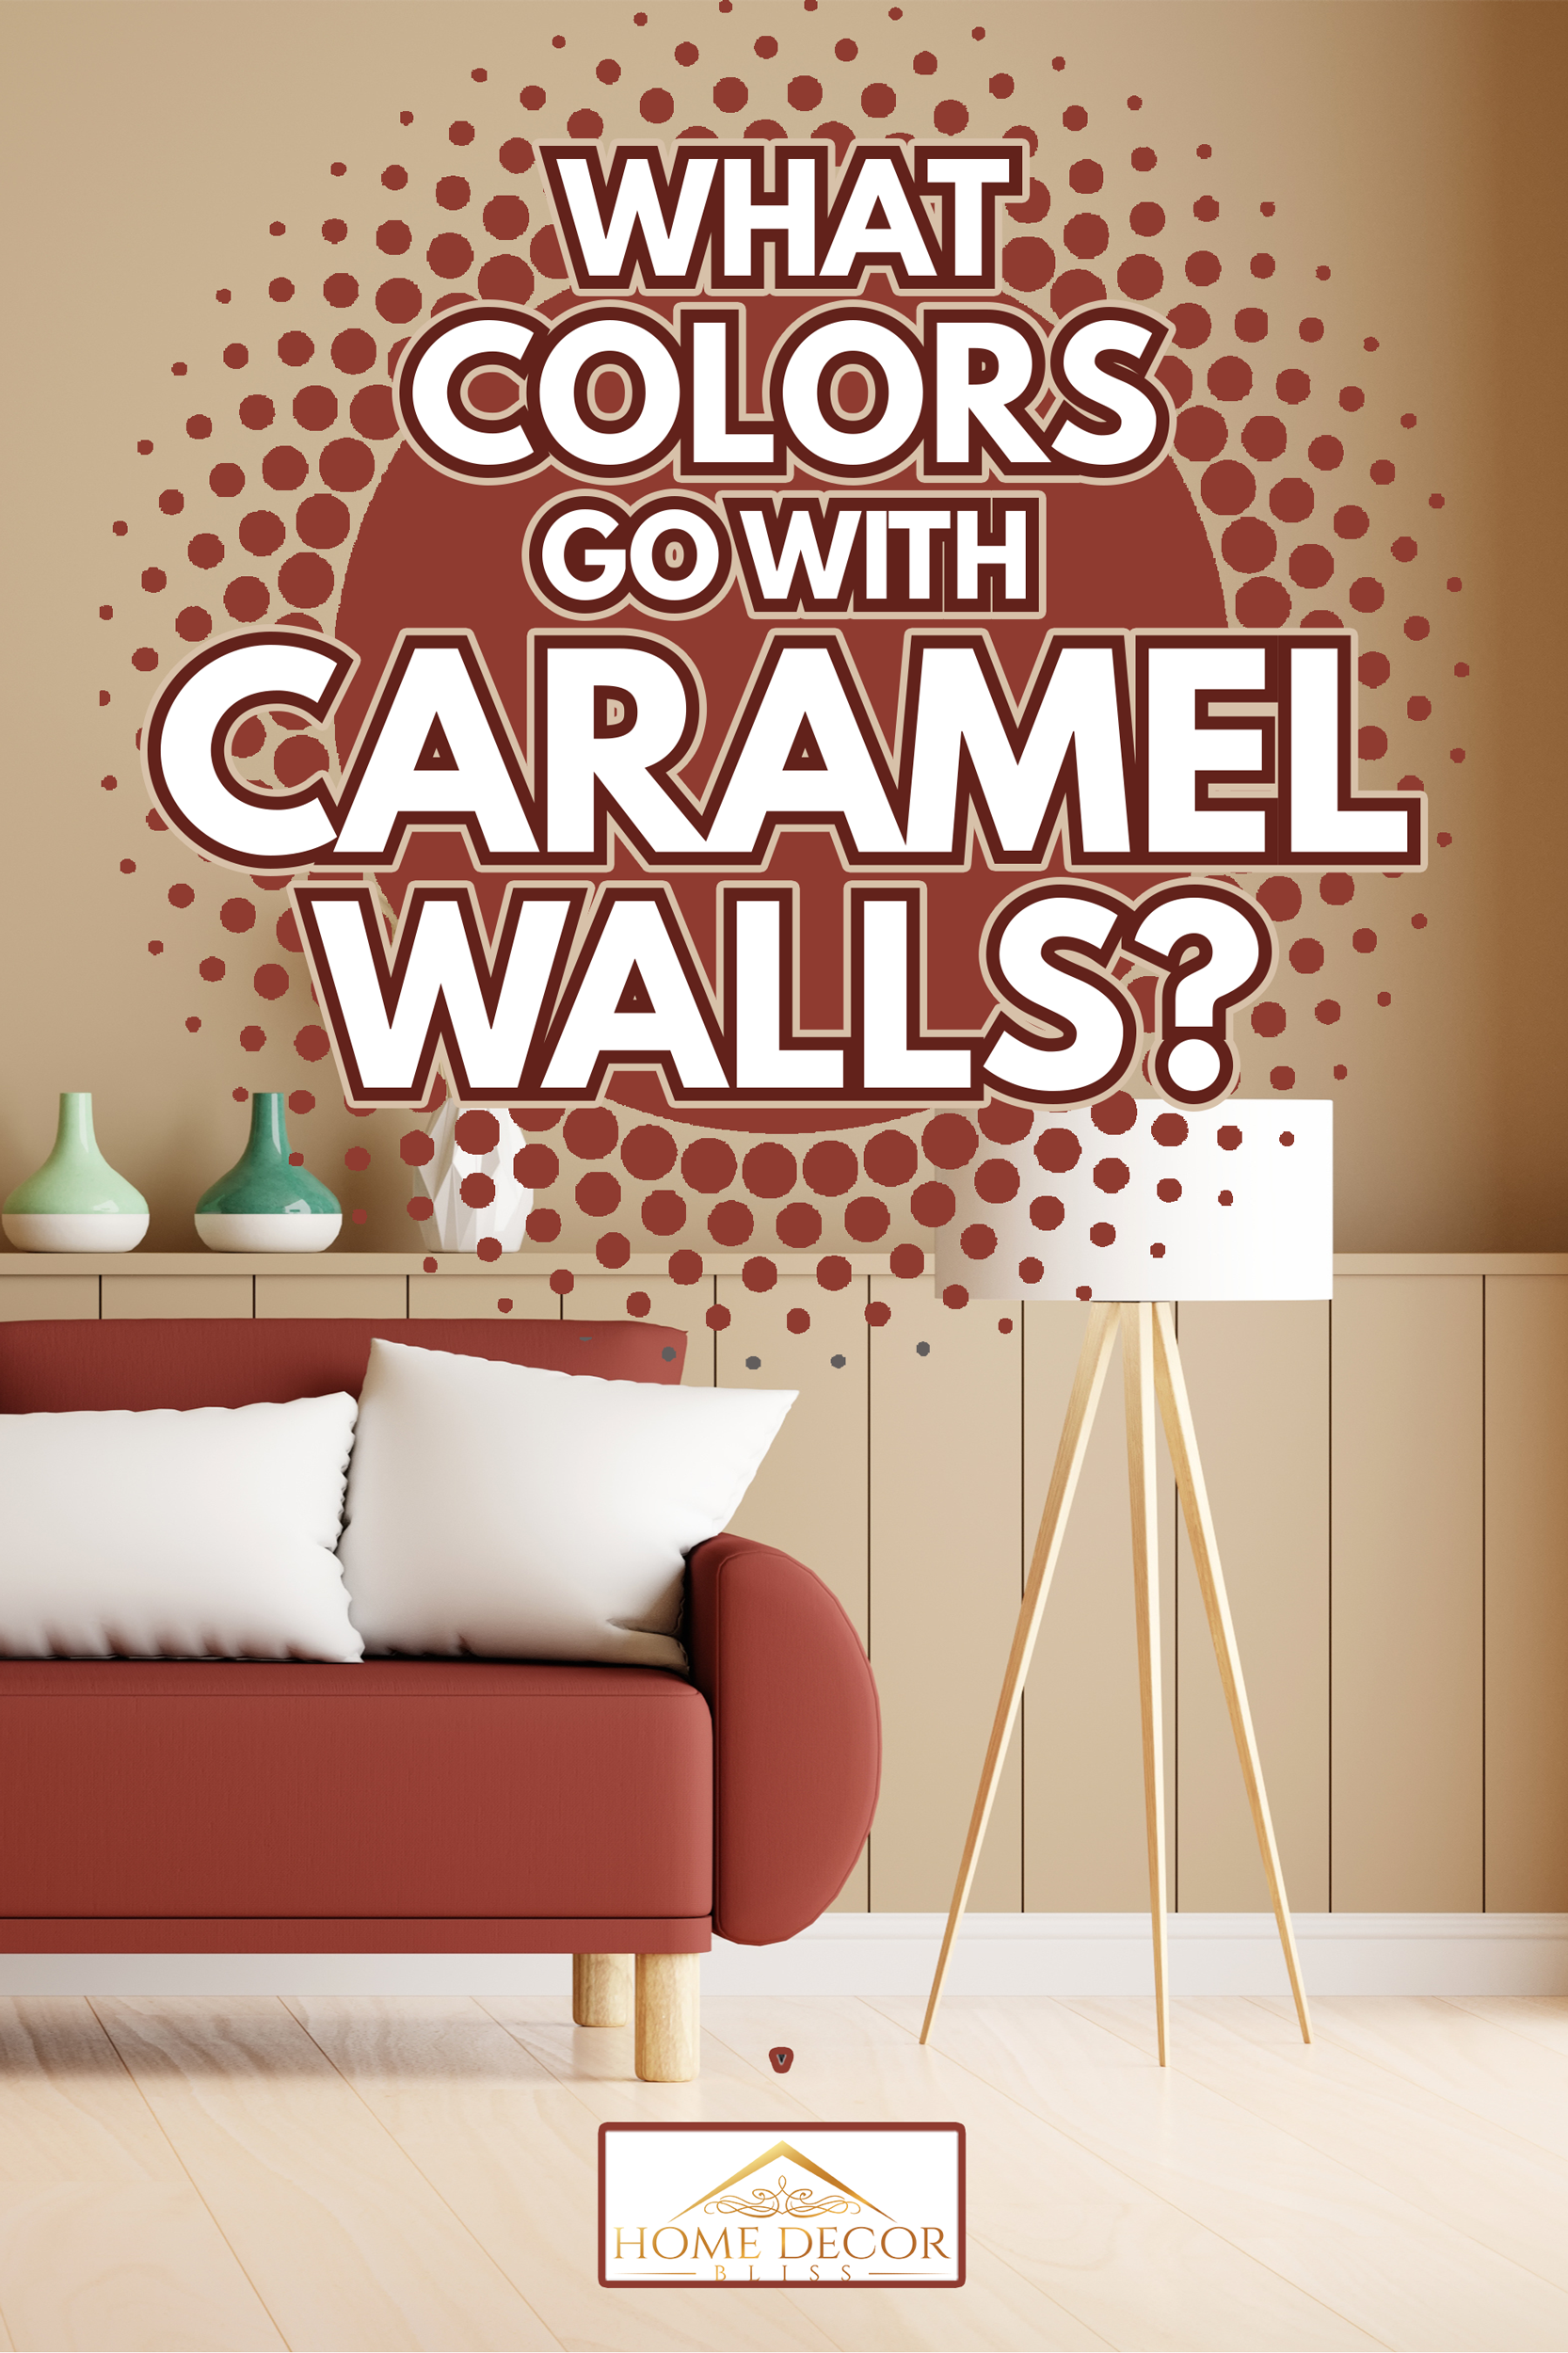 Sofa in brown living room interior with free space for mockup - What Colors Go With Caramel Walls